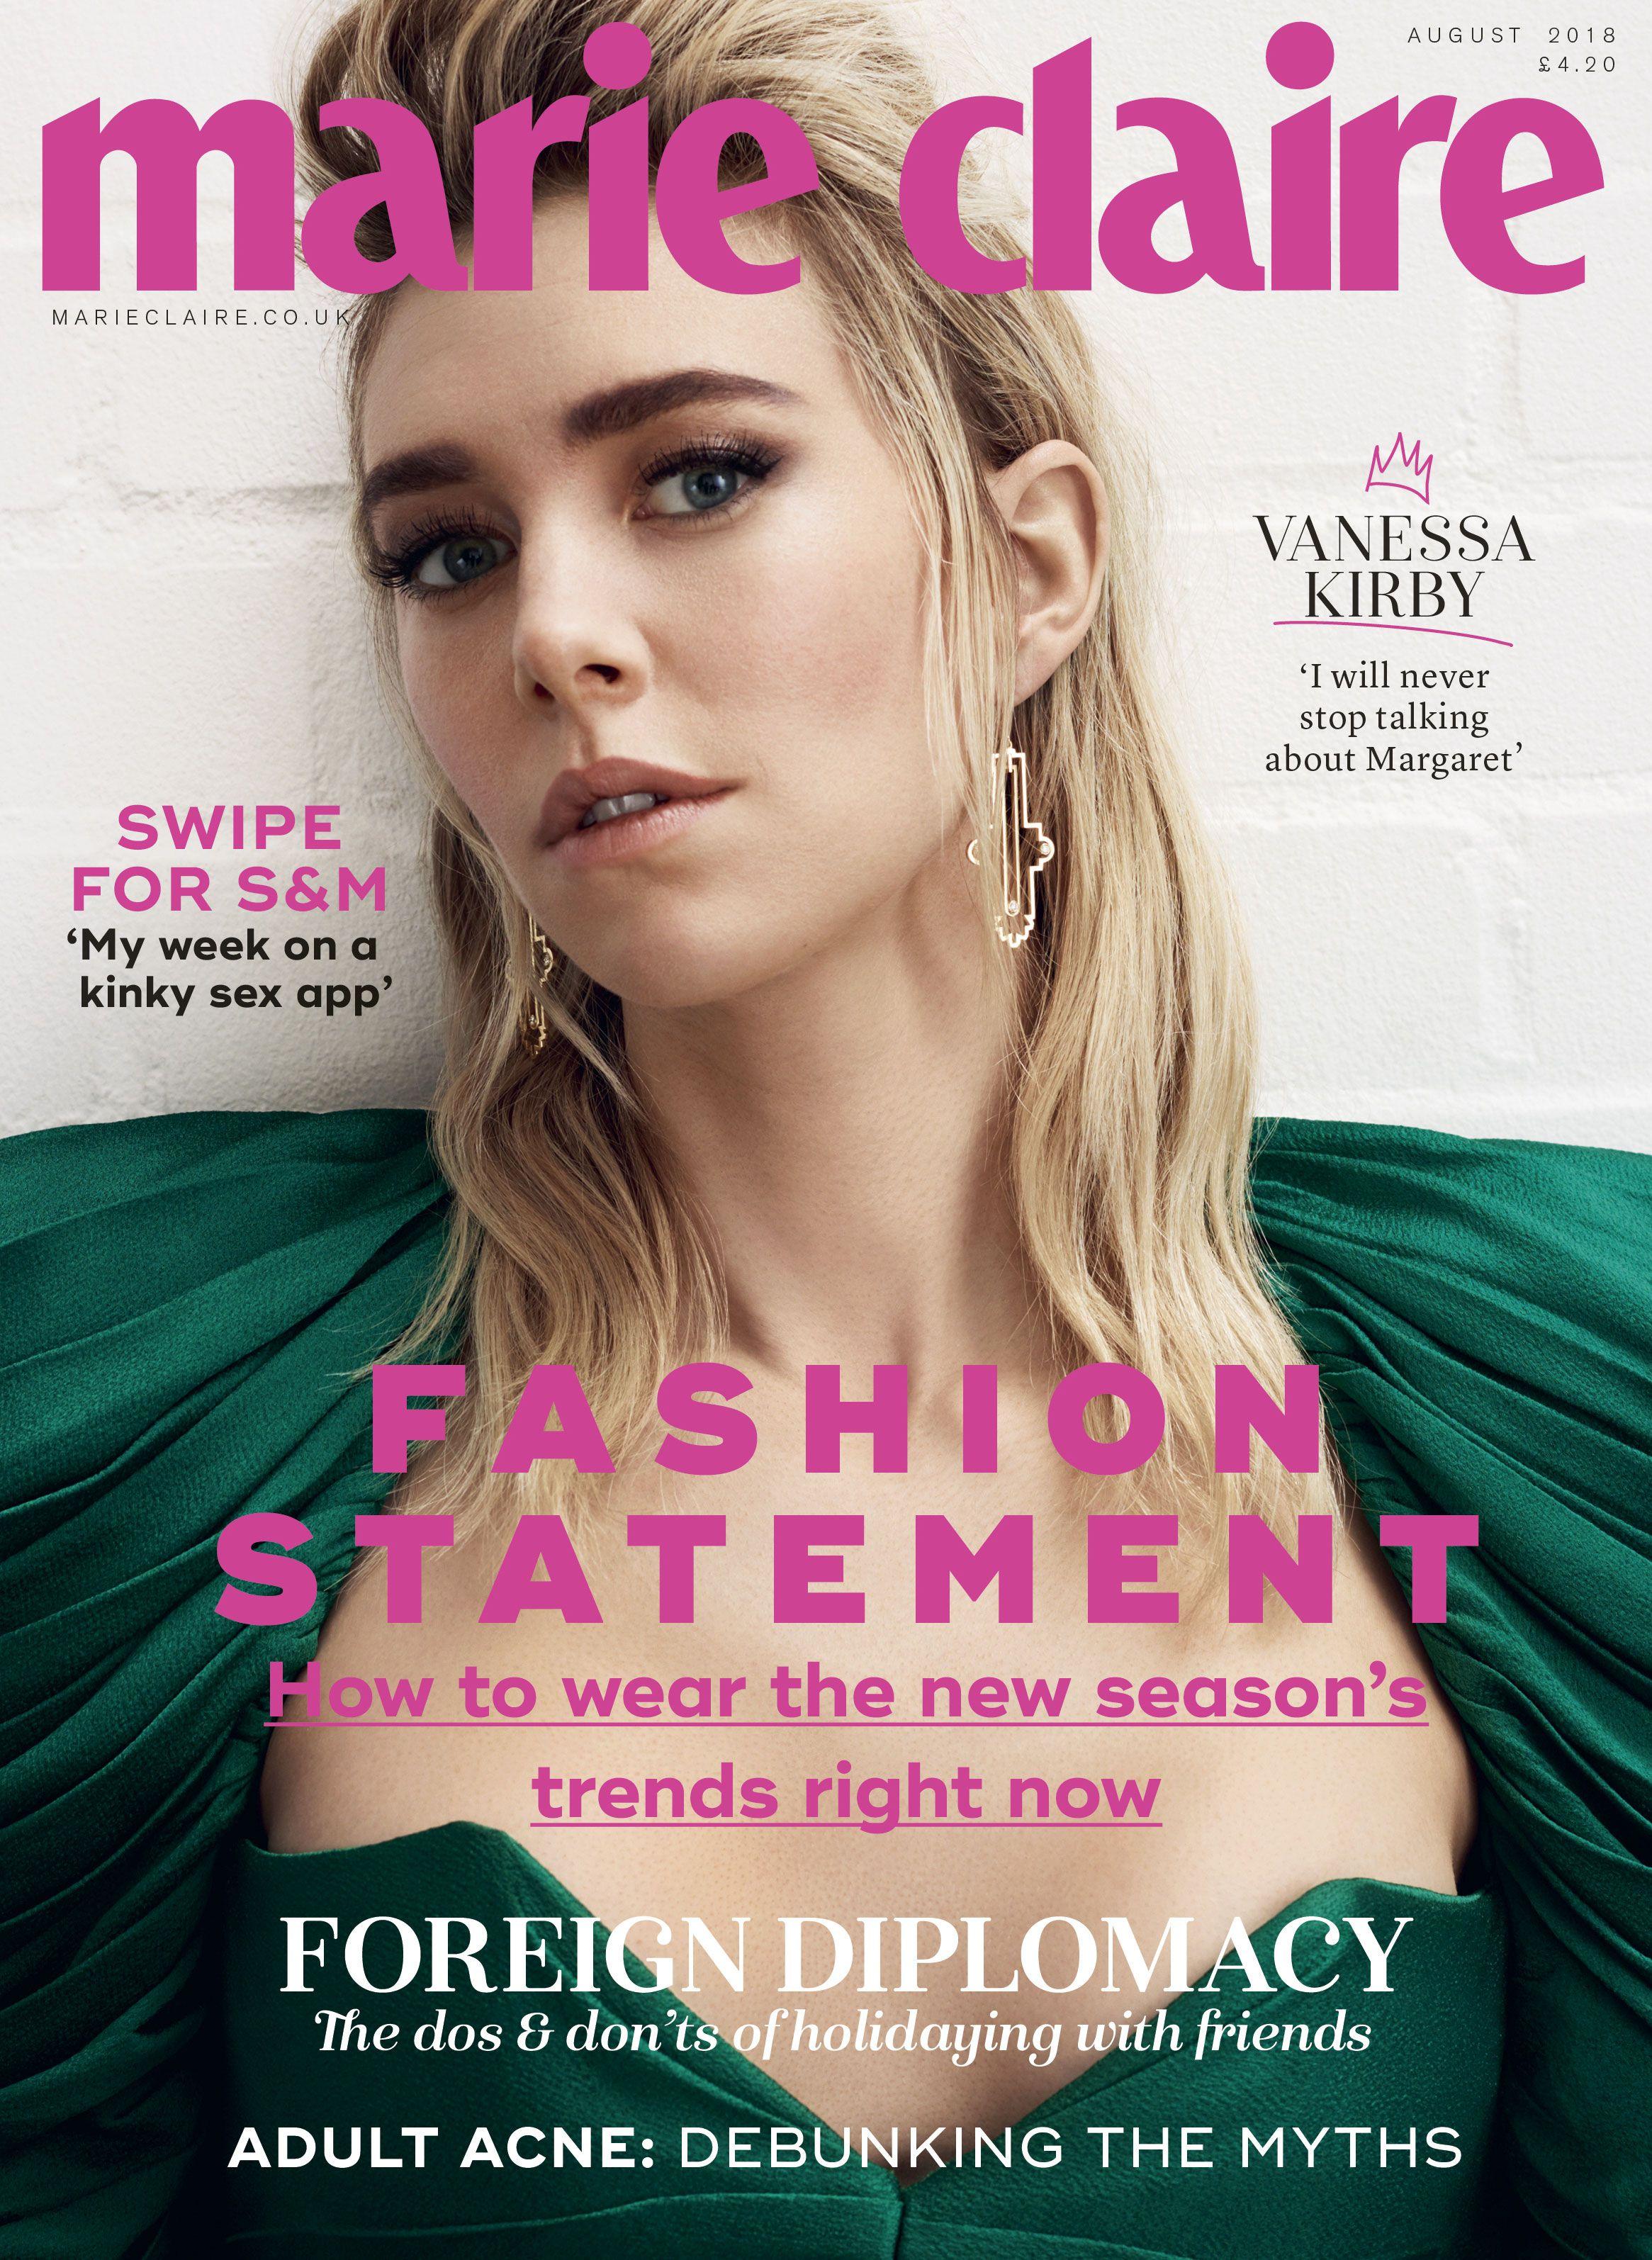 Marie Claire Company Logo - Vanessa Kirby On The Crown Text She Got From Helena Bonham Carter